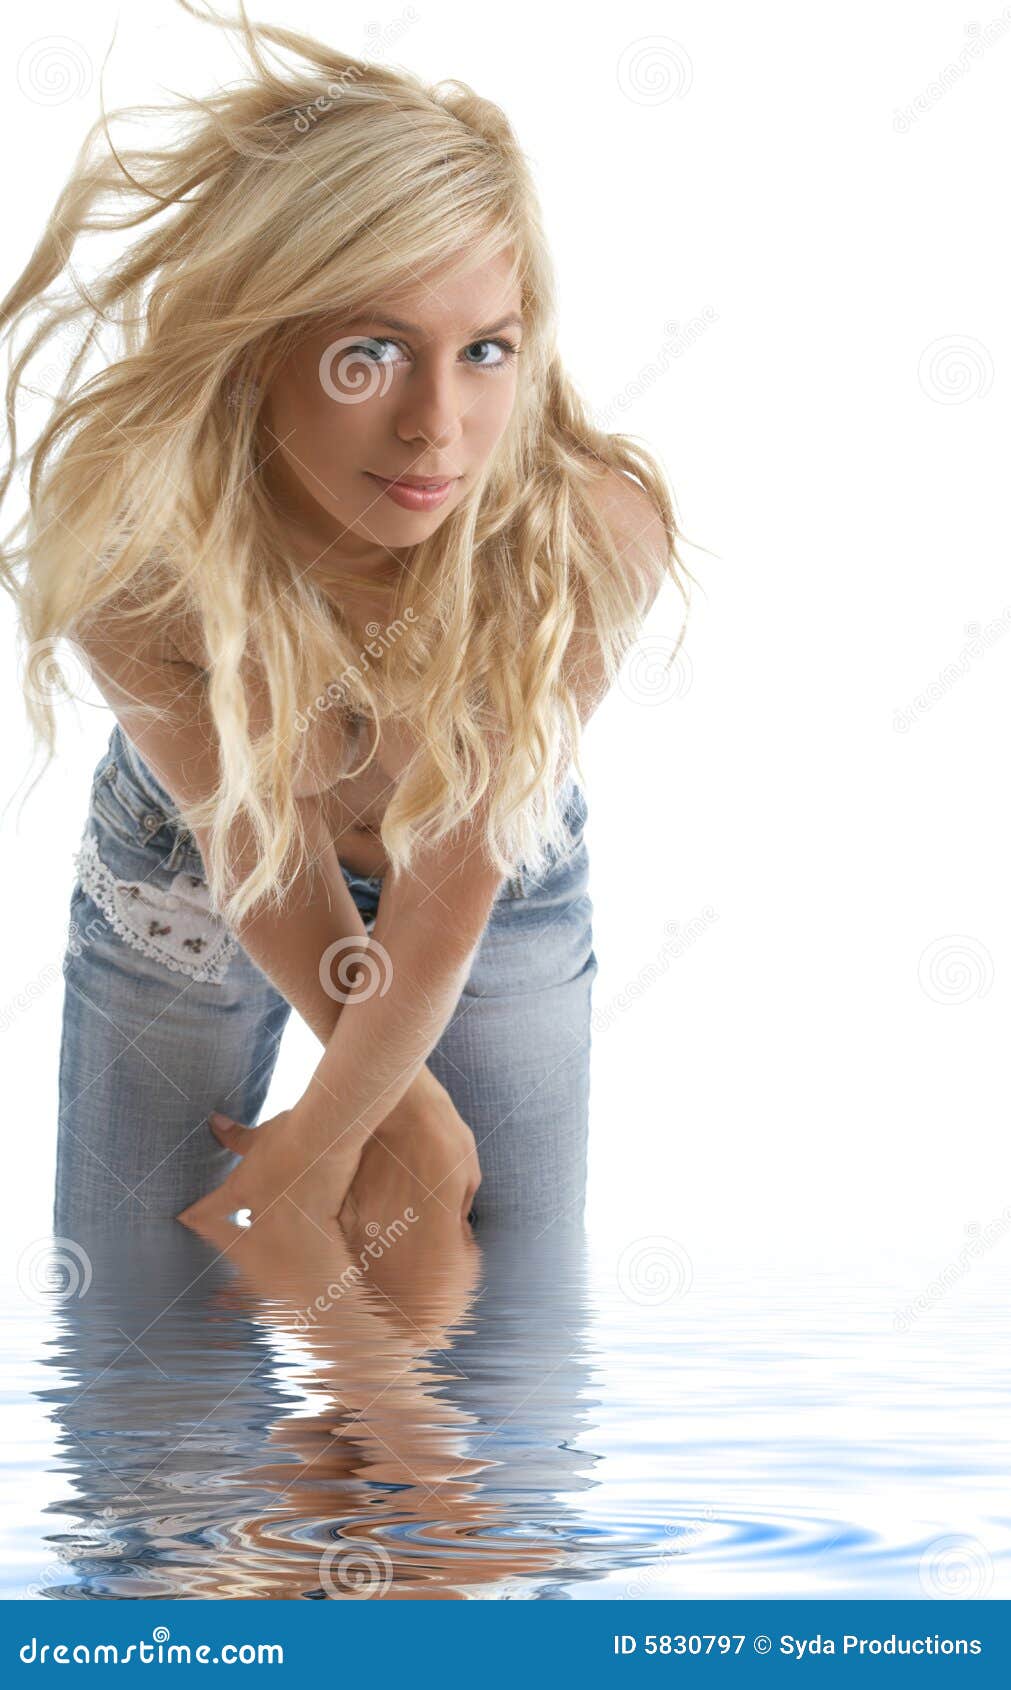 Blondes In Jeans